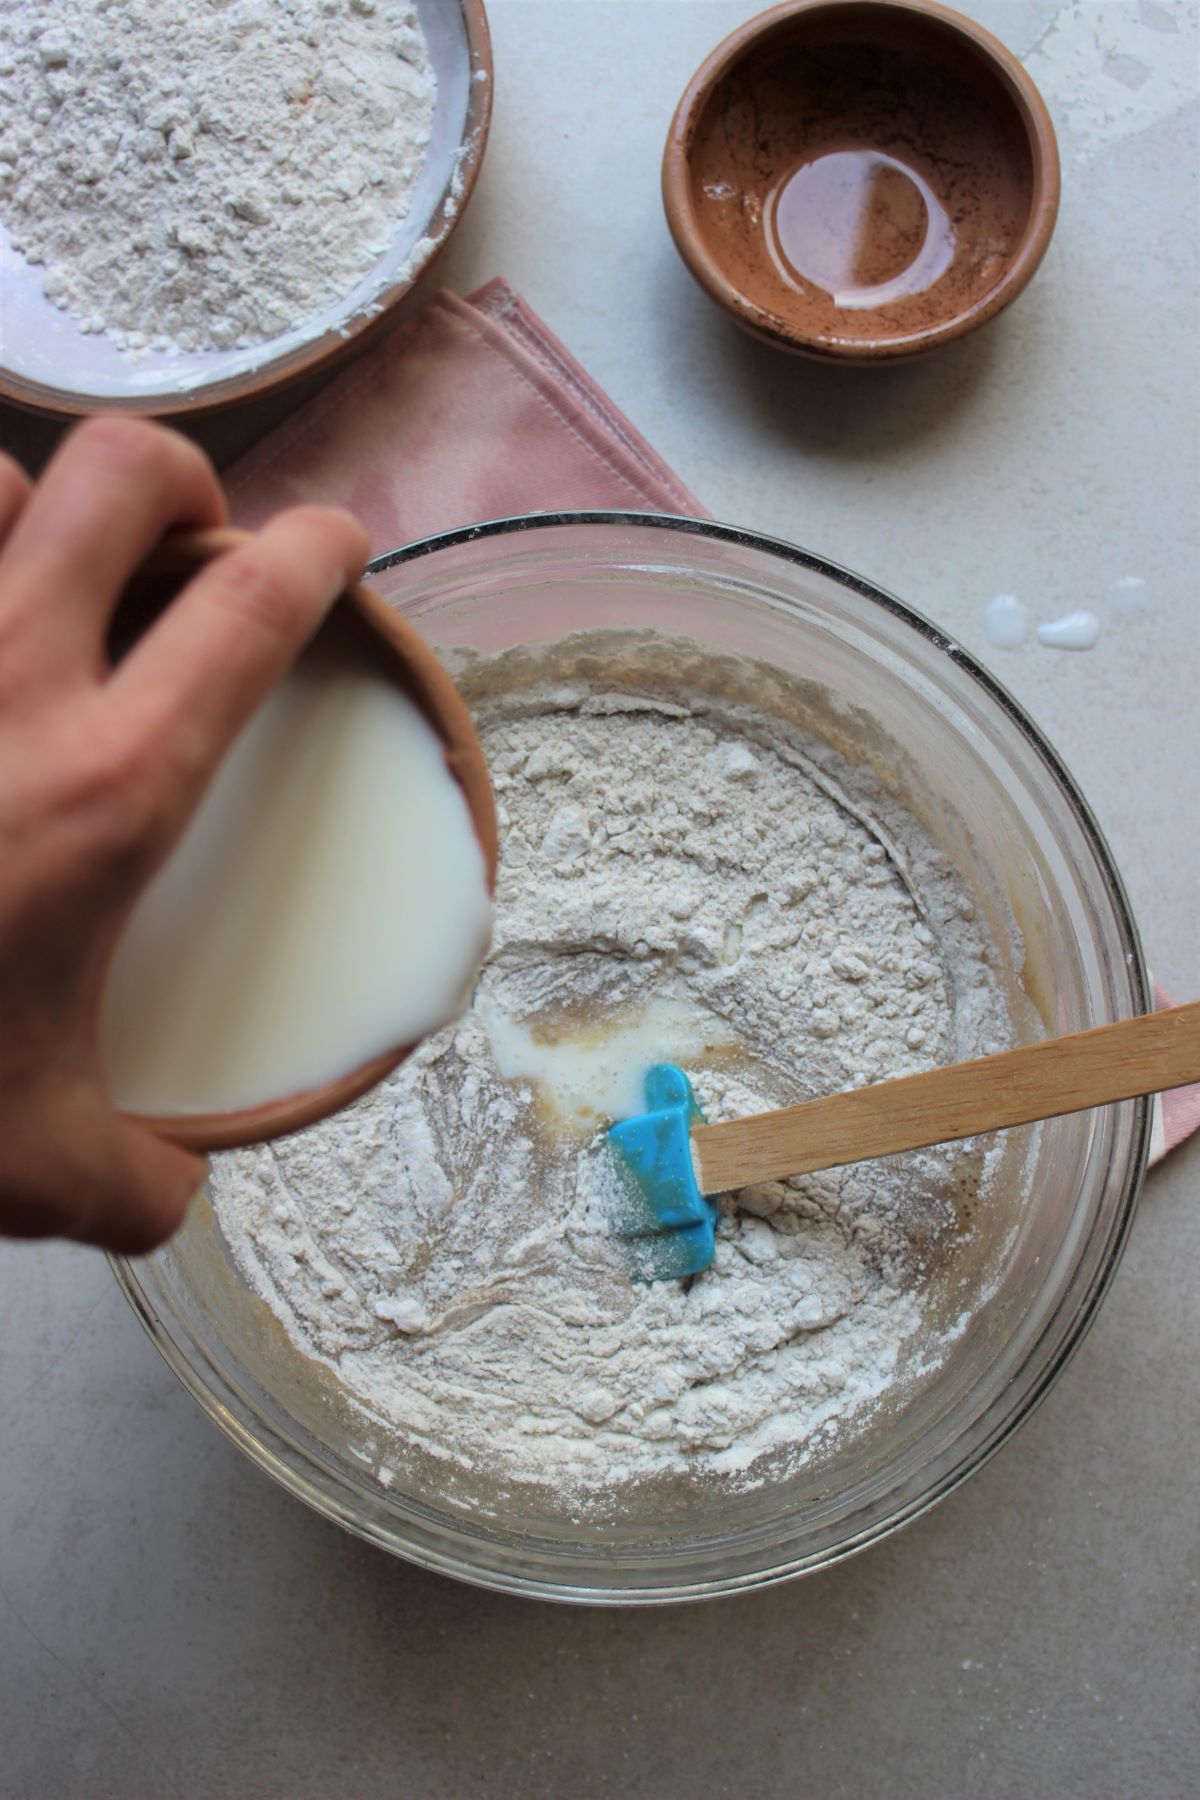 Banana loaf process: glass bowl with the loaf mixture, dry ingredients and adding the milk.